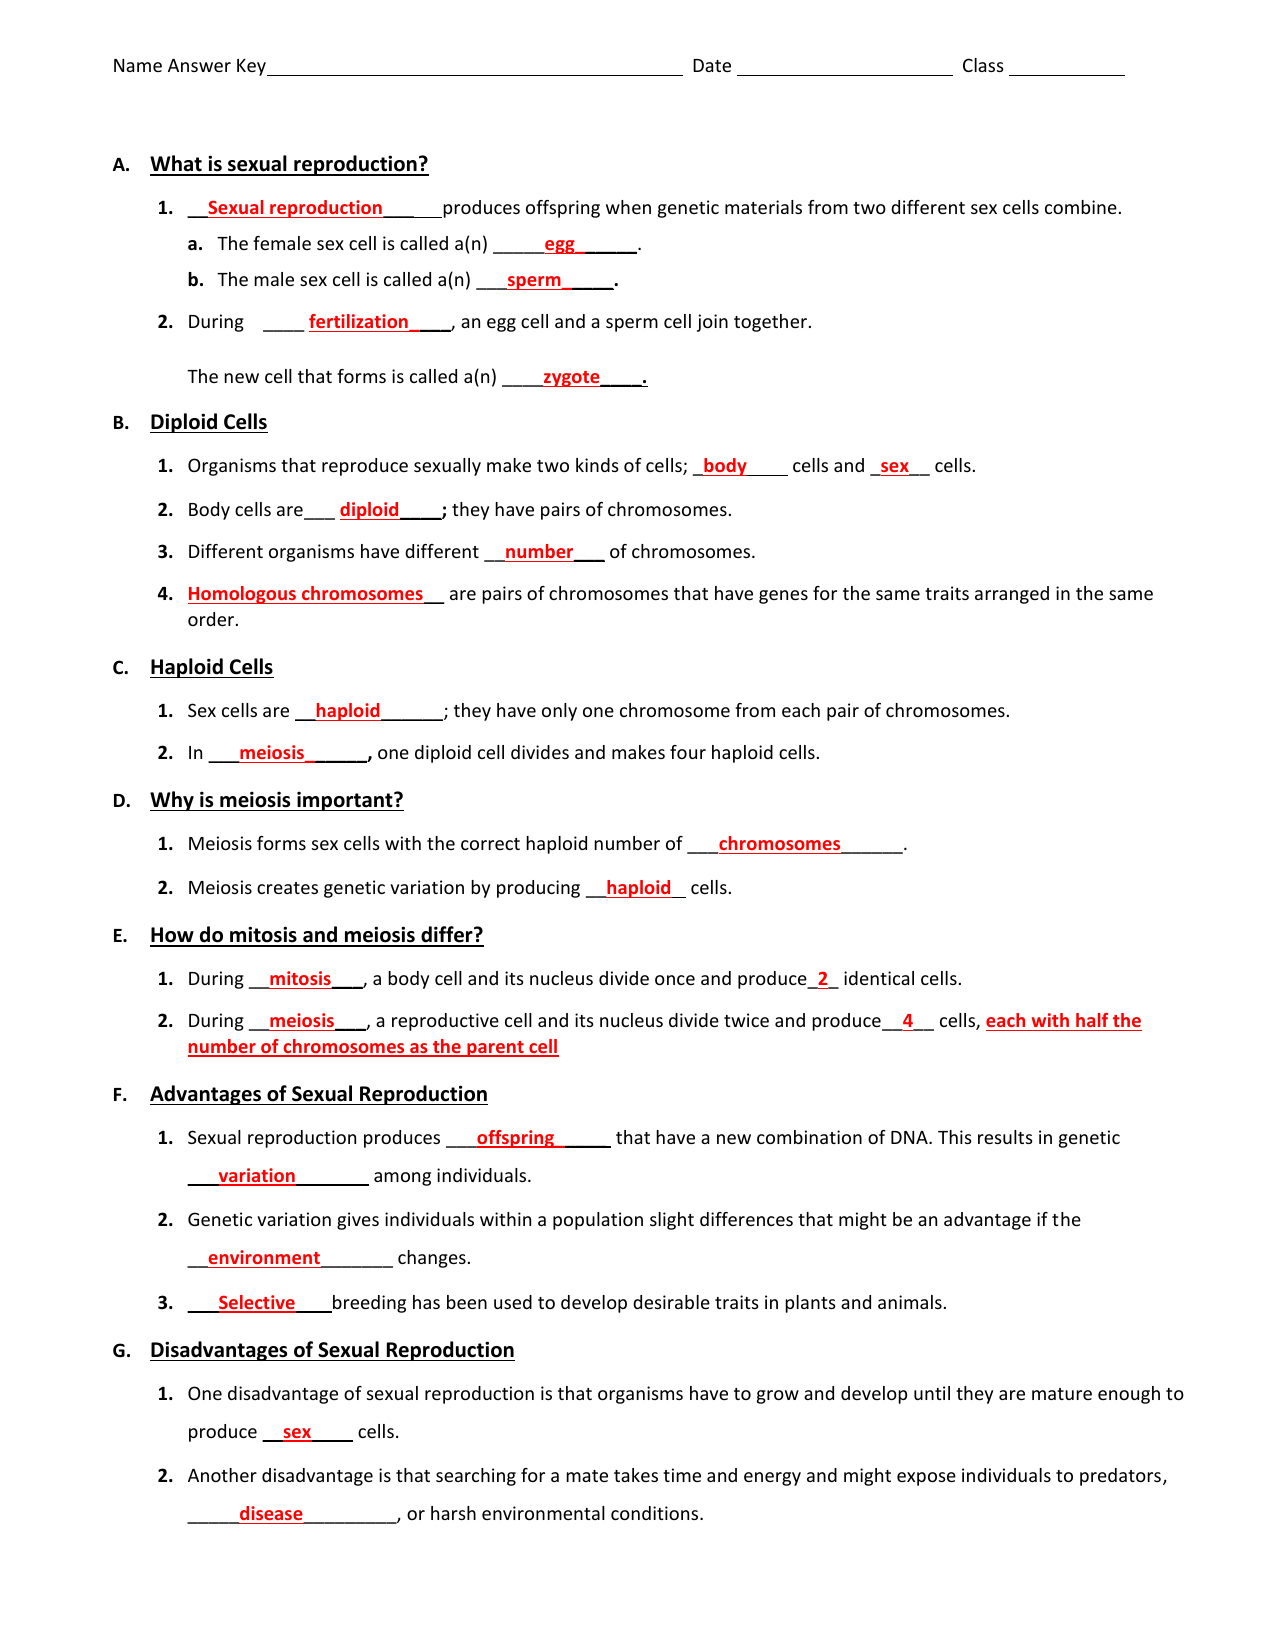 Snurfle Meiosis And Genetics 1 Answer Key + My PDF Collection 2021